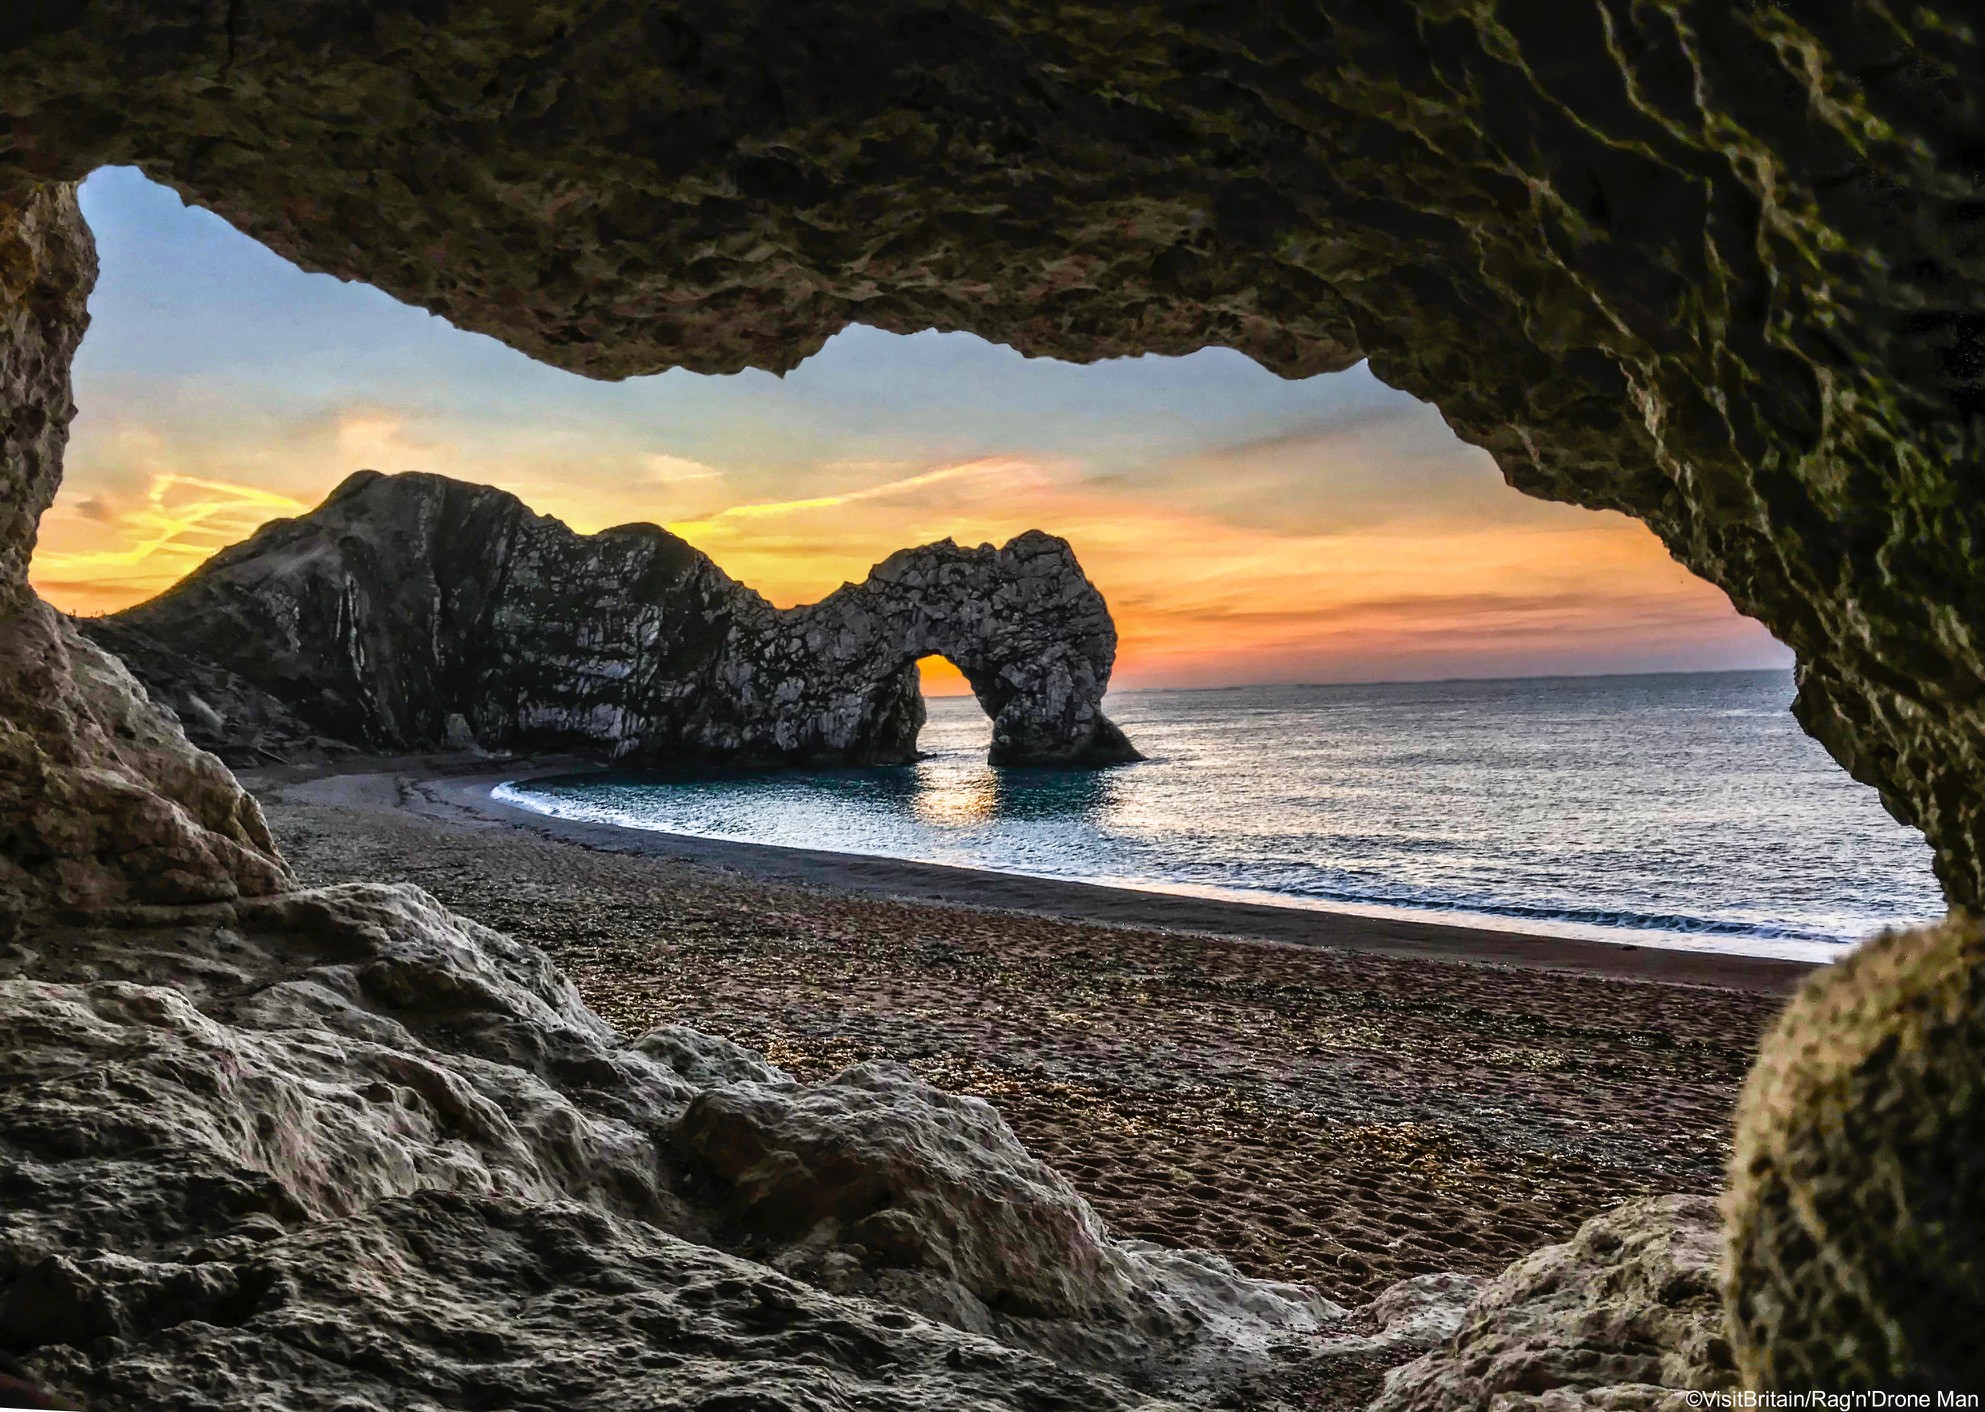 Sunset over Durdle Door, Dorset, England. TIF file available upon request - please contact info@visitbritainimages.com